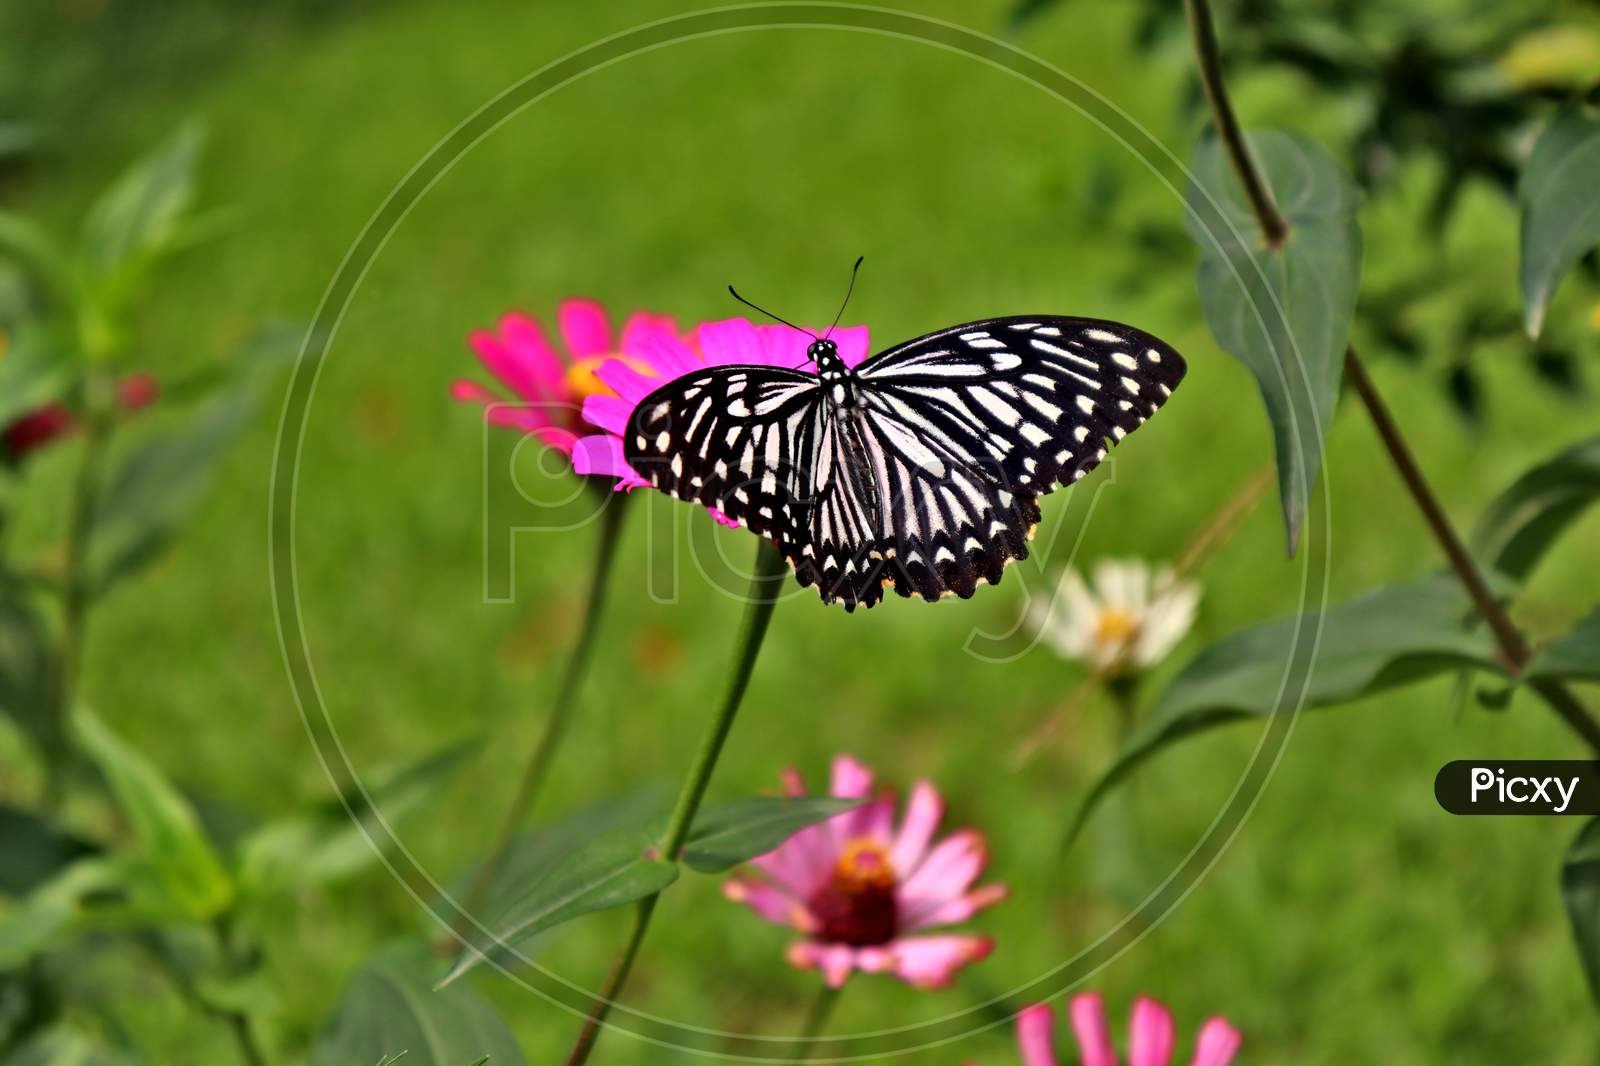 Black and off-white Butterfly